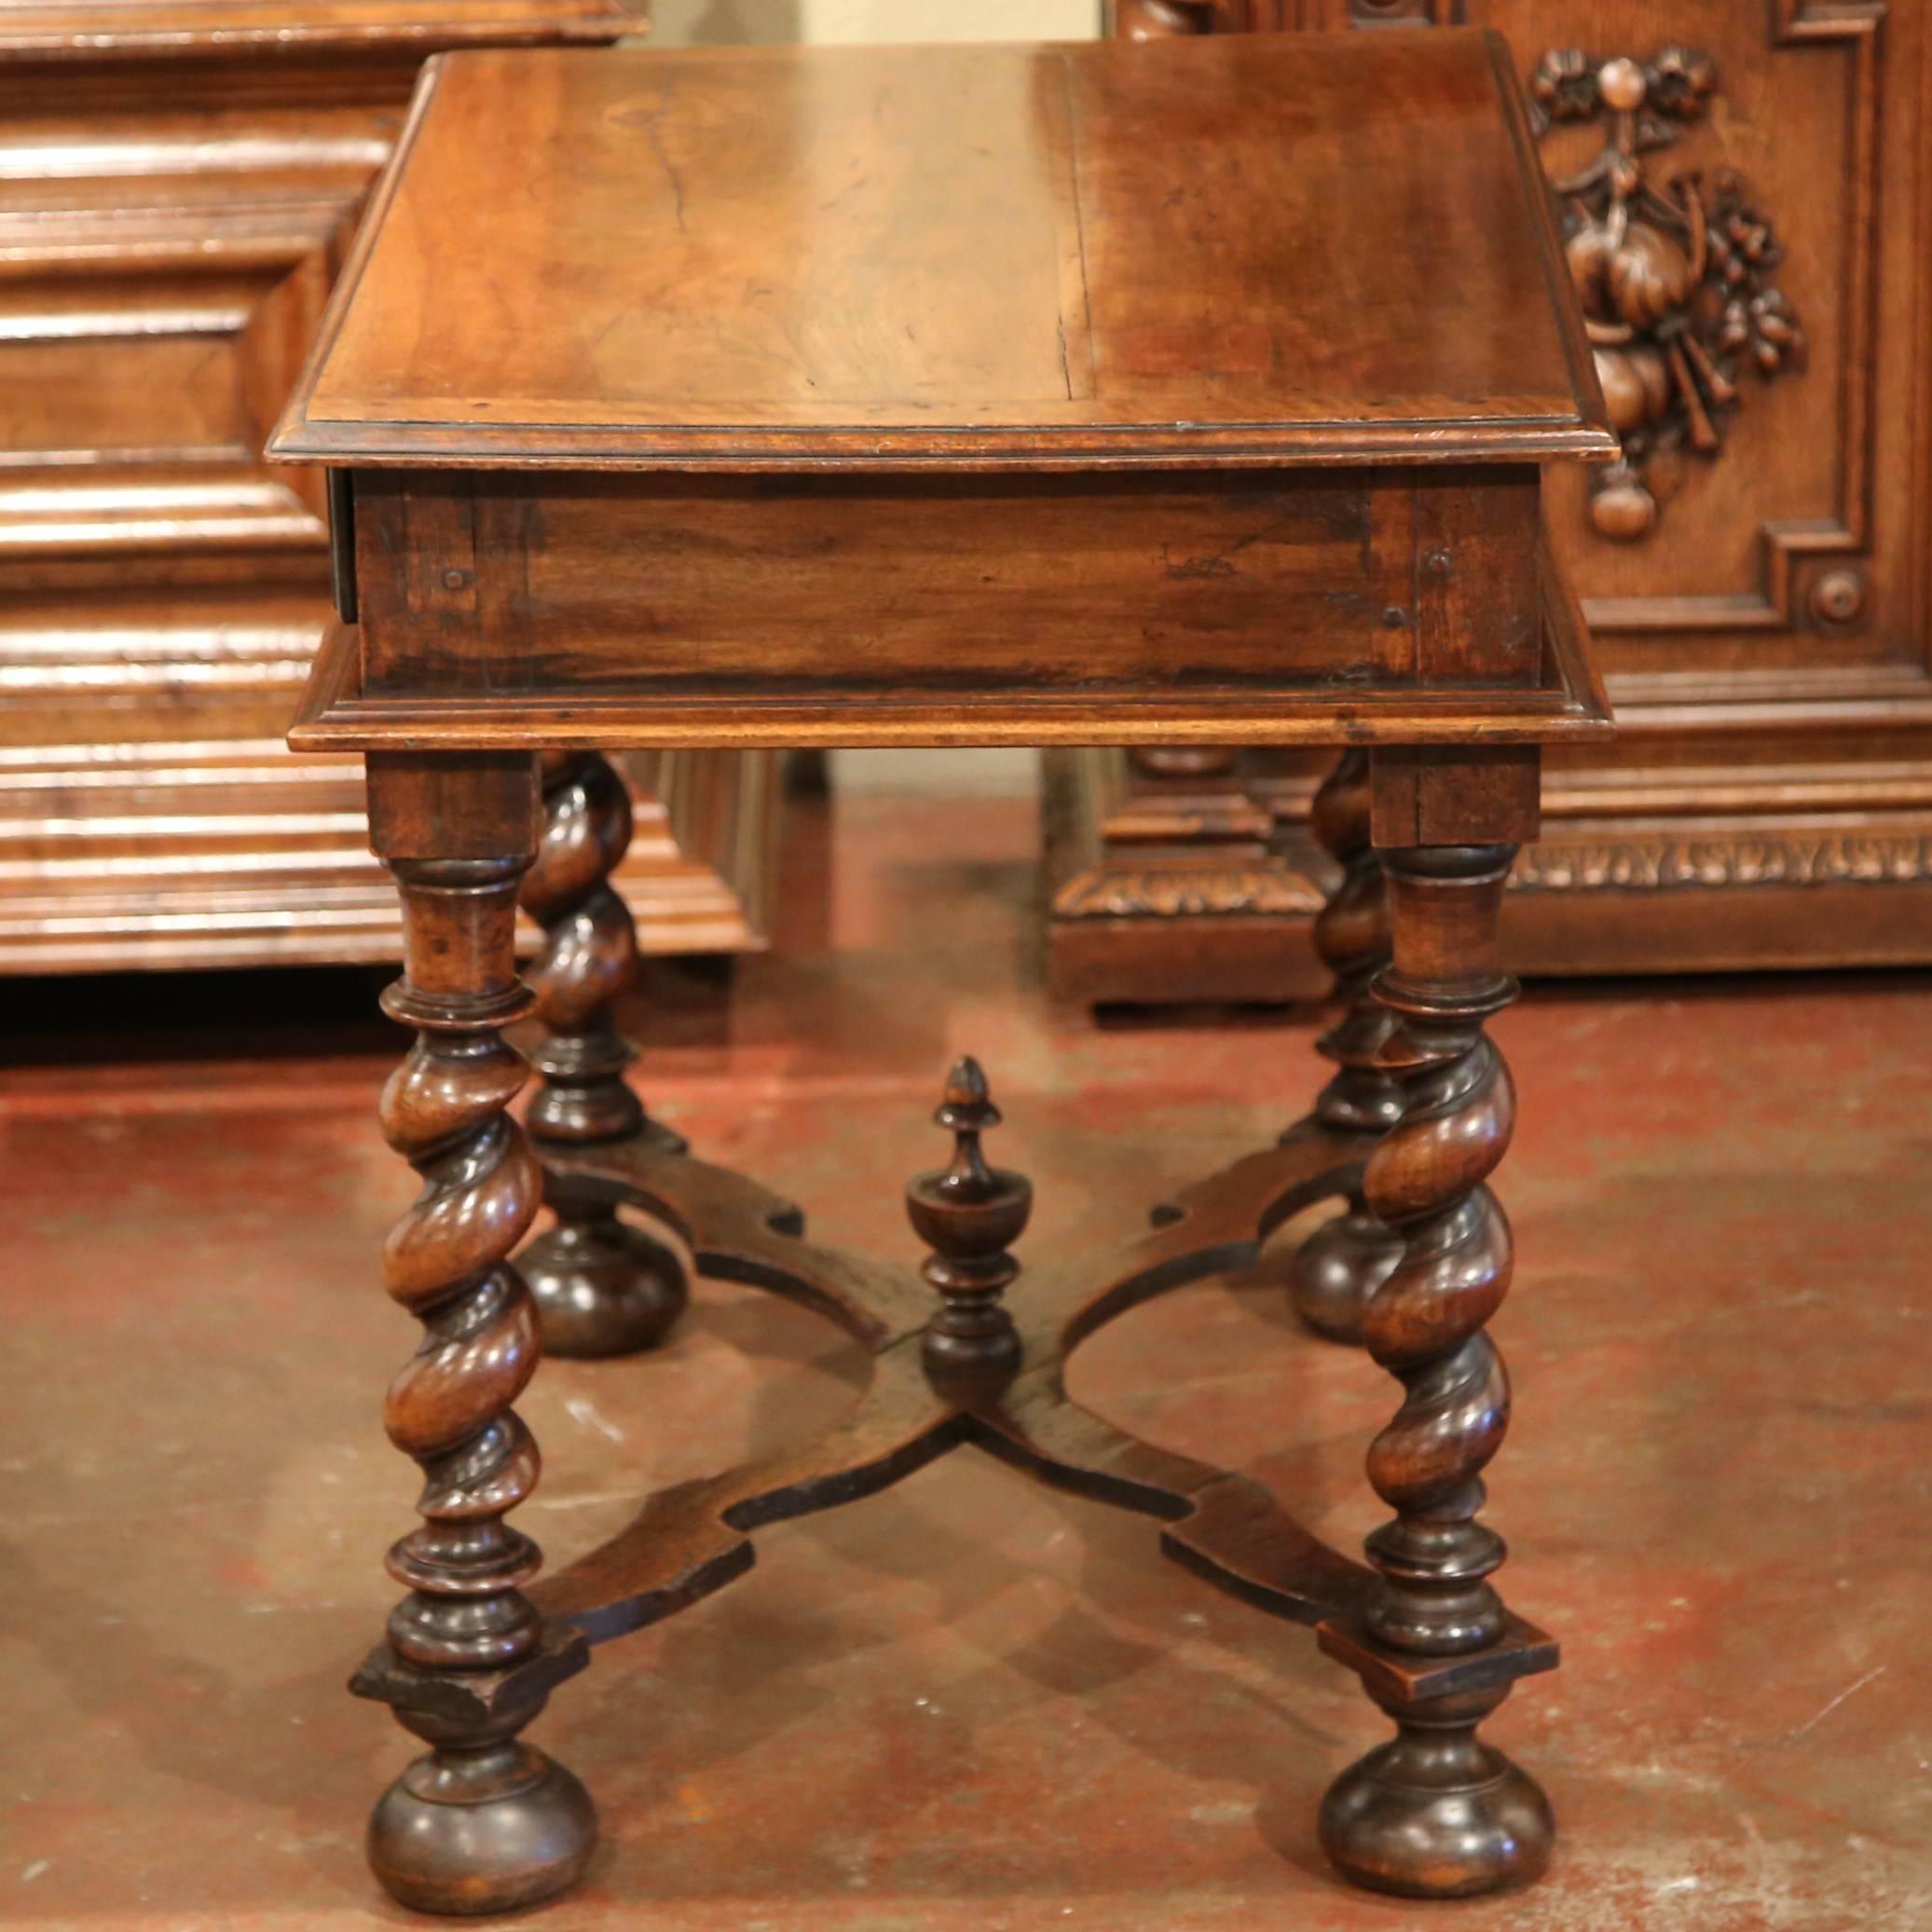 18th Century, French, Louis XIII Carved Walnut Table Desk with Barley Twist Legs 1